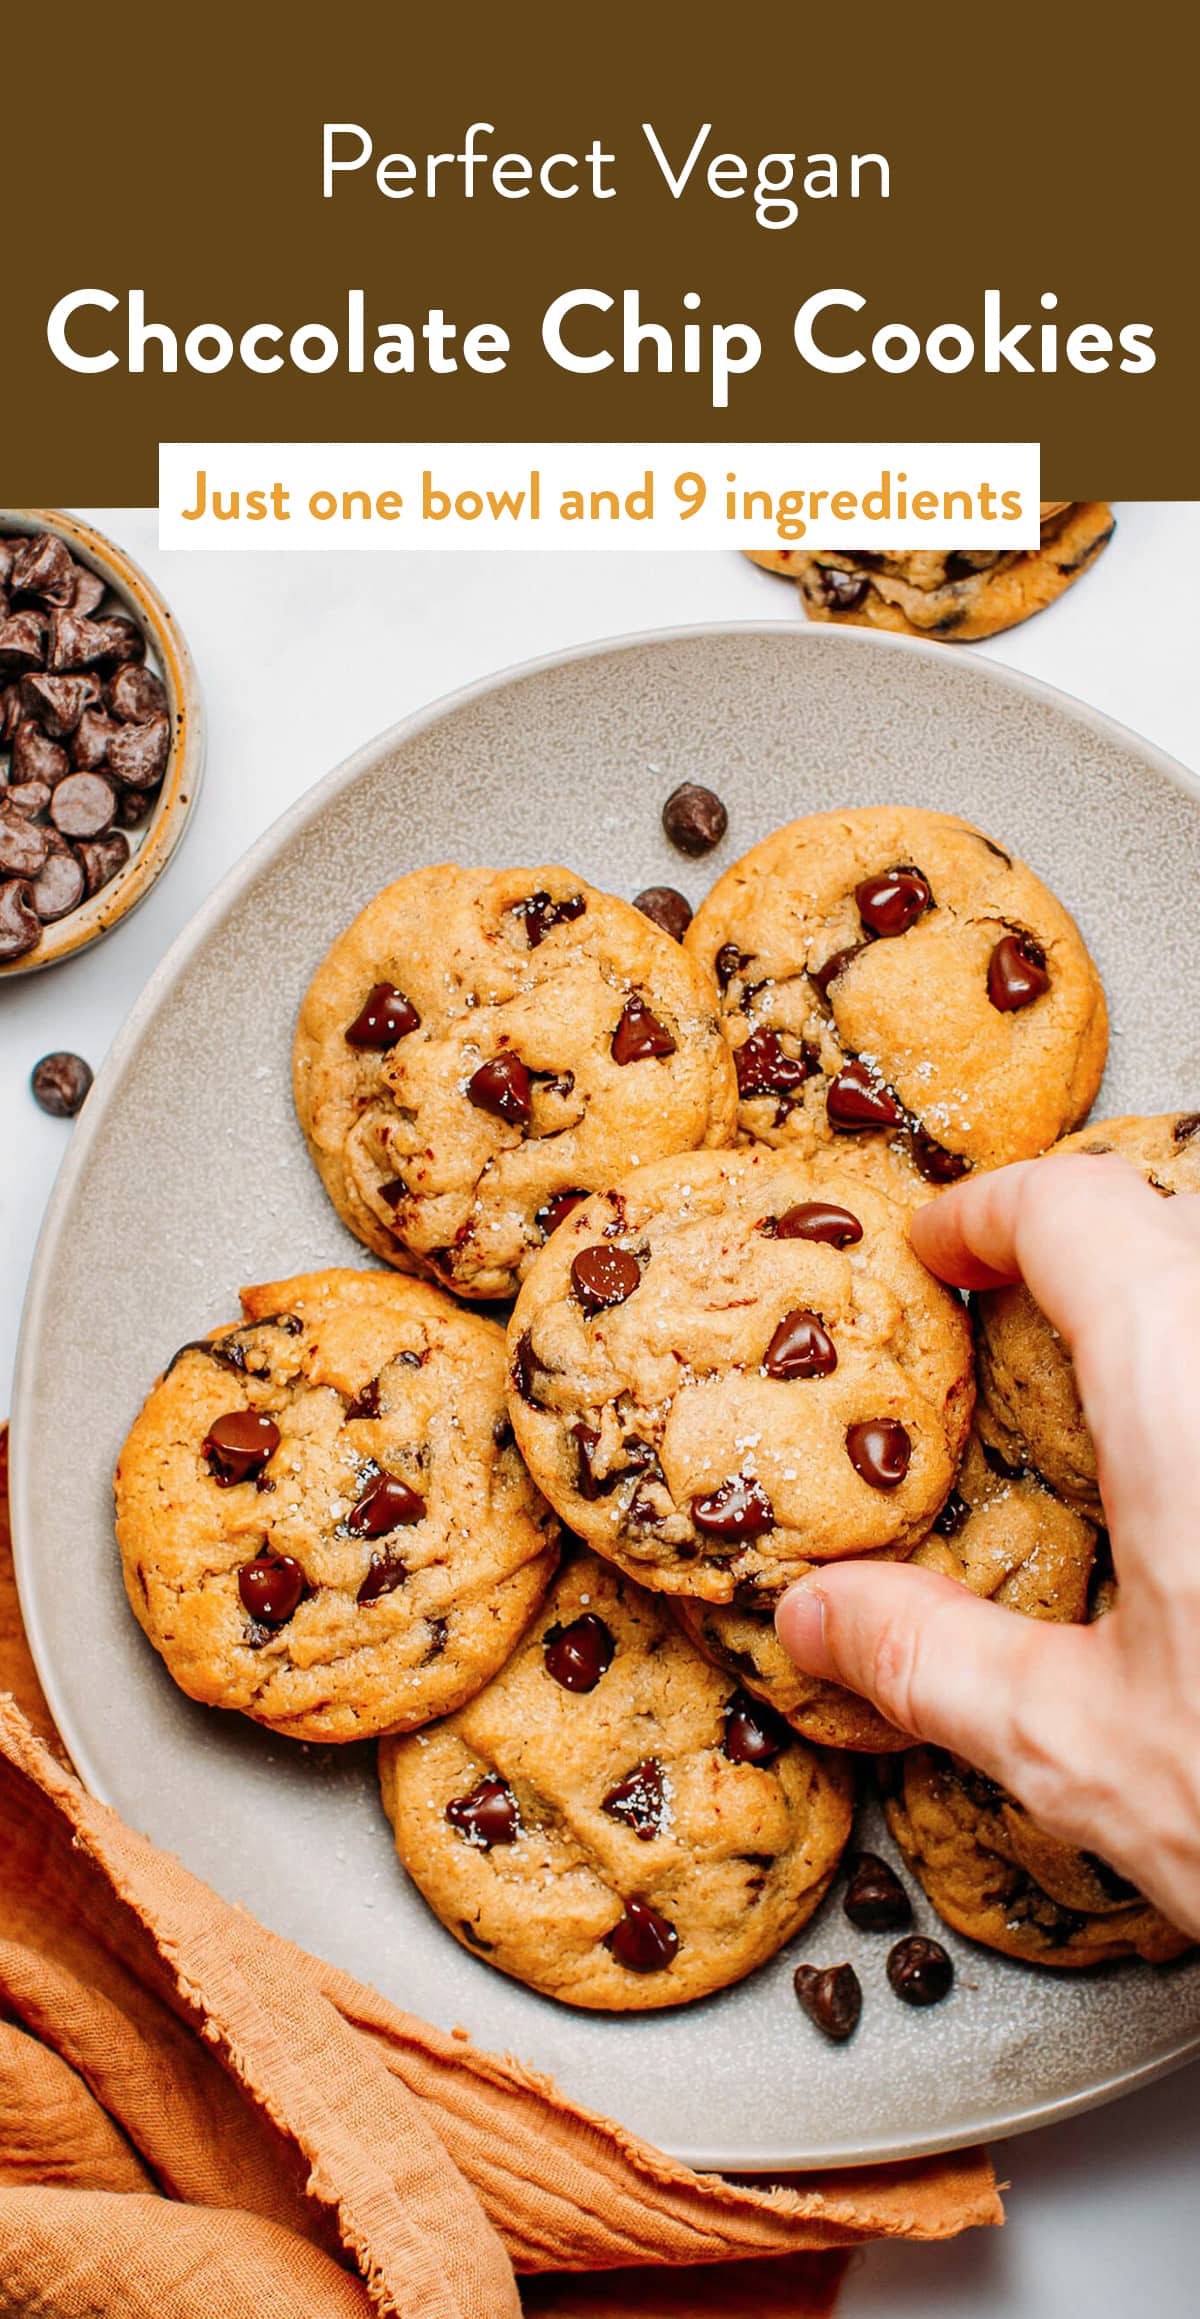 Tender and chewy, slightly crispy on the edges, these vegan cookies are loaded with melty dark chocolate chips and are so addicting! Just one bowl and 9 ingredients, these are simply the best and easiest vegan chocolate chip cookies! #vegancookies #veganbaking #cookierecipe